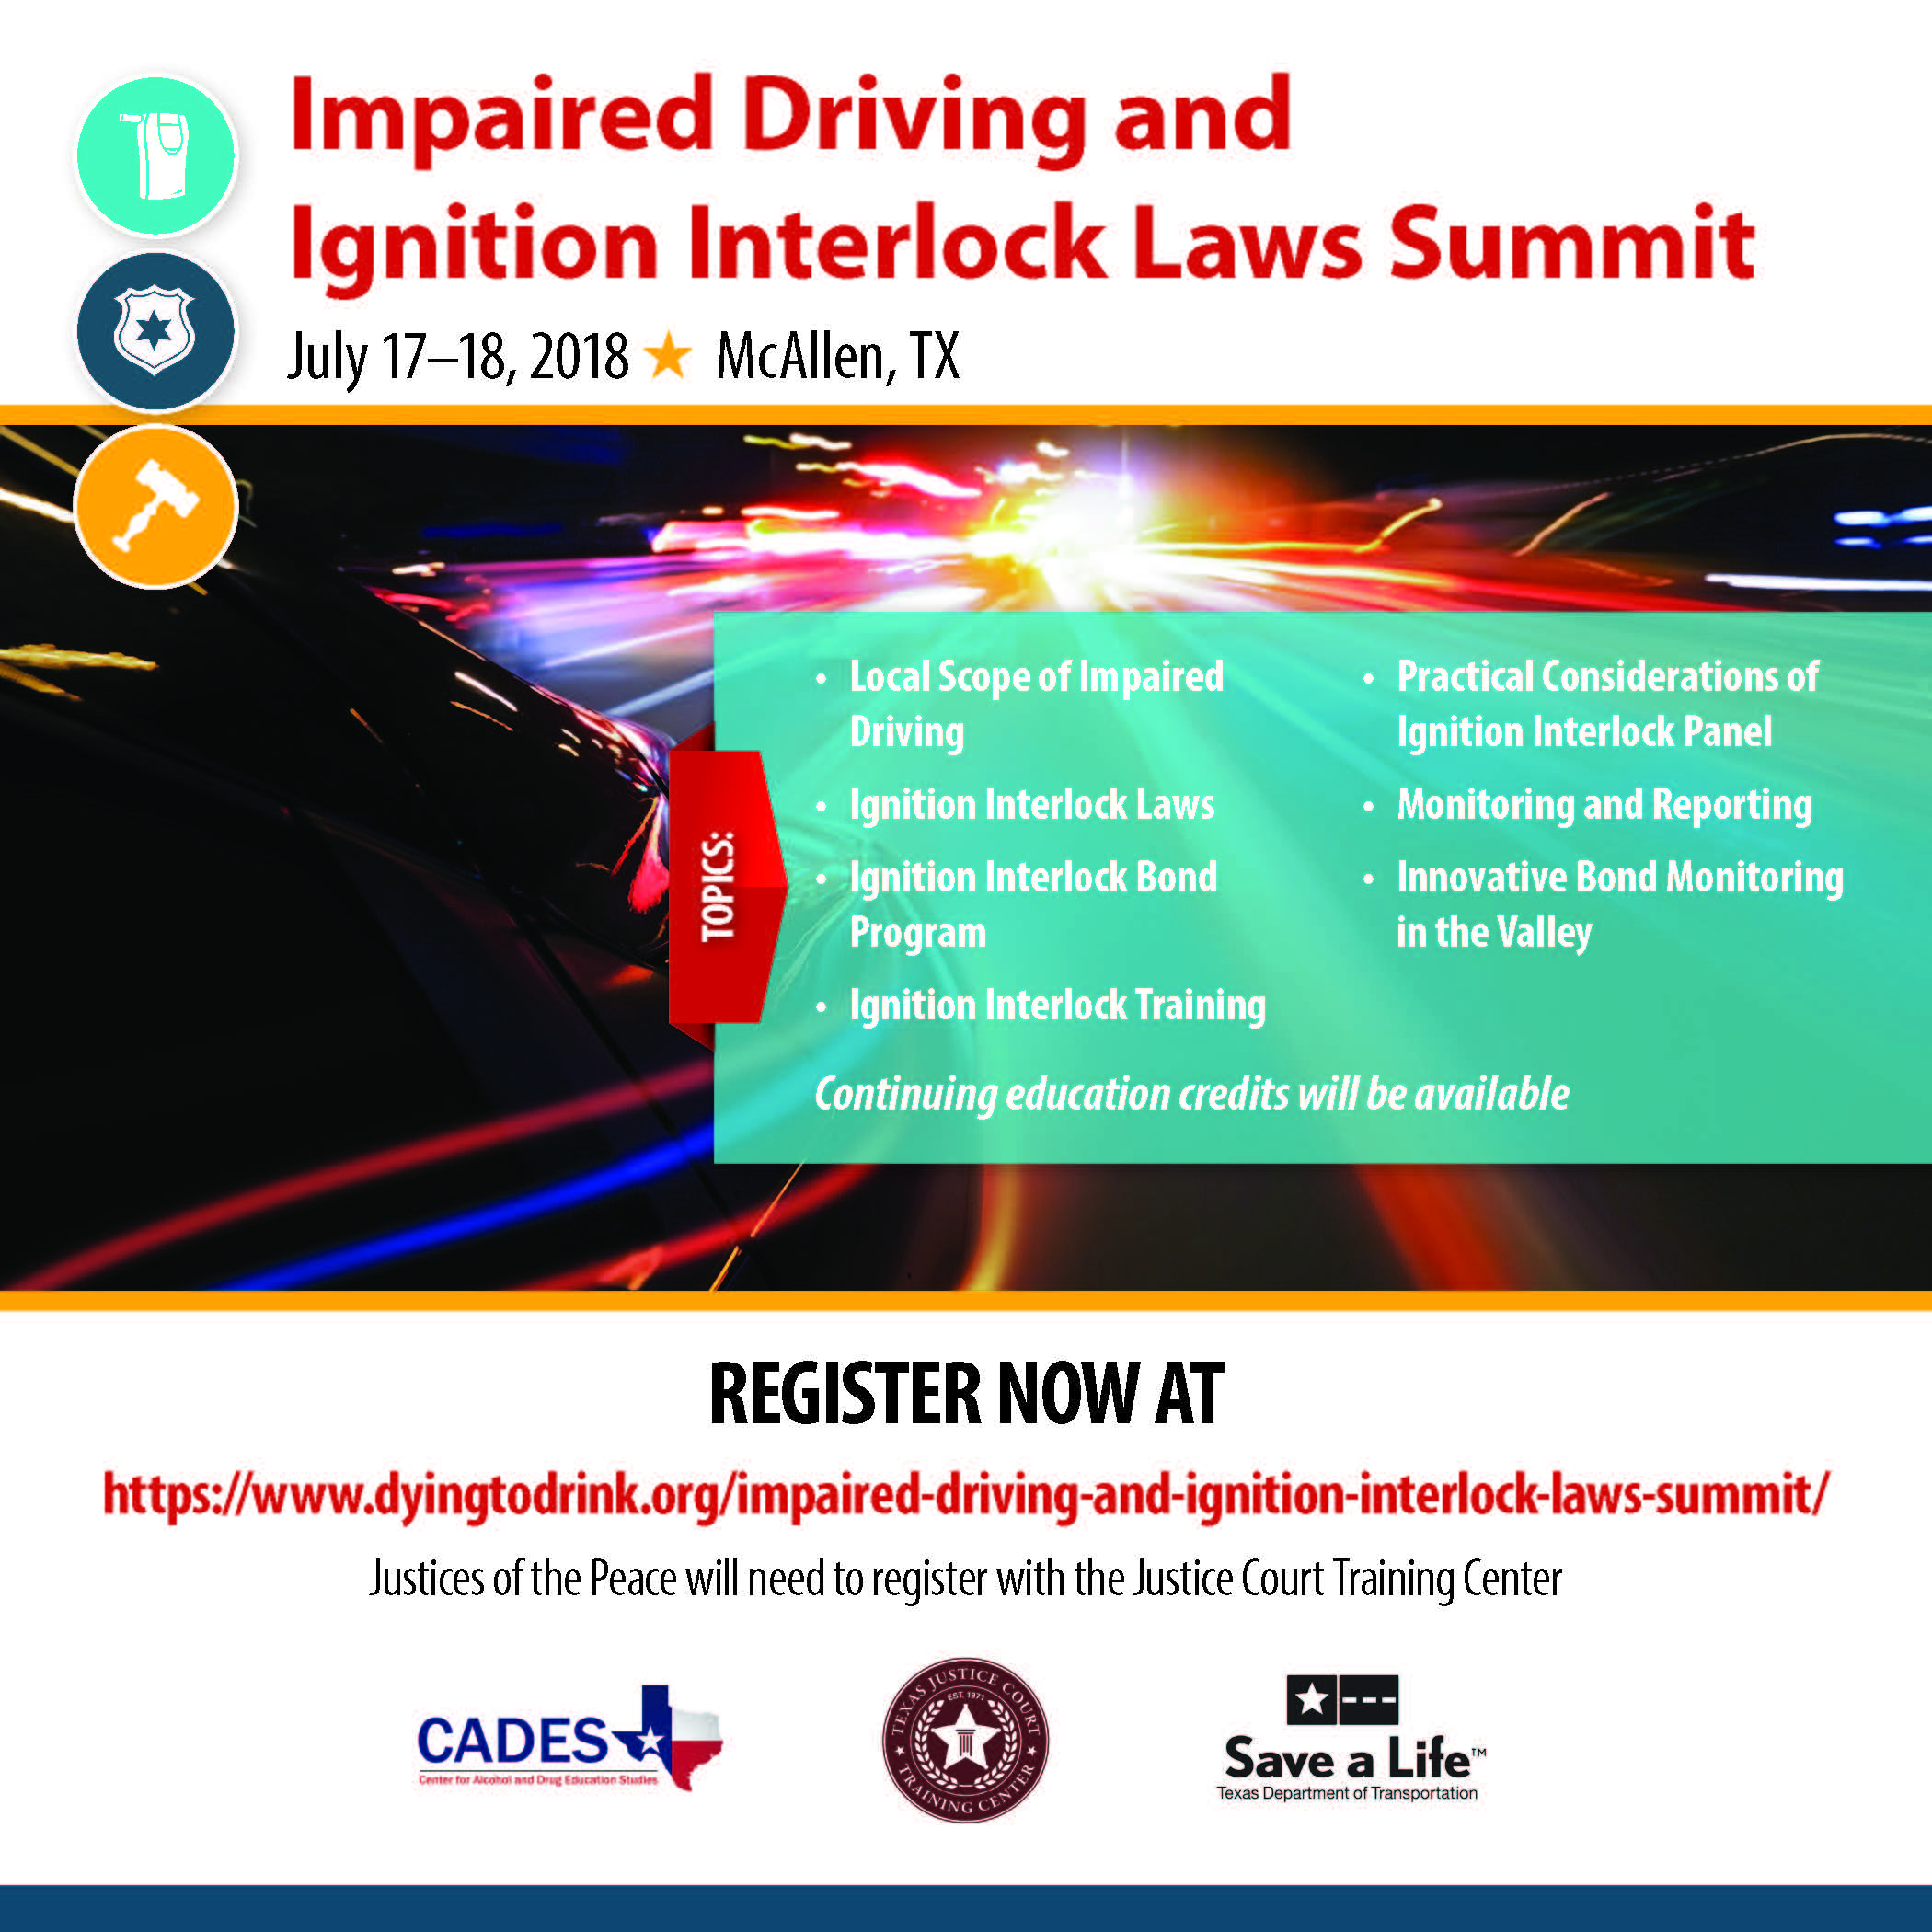 Register Now For The Impaired Driving And Ignition Interlock Laws